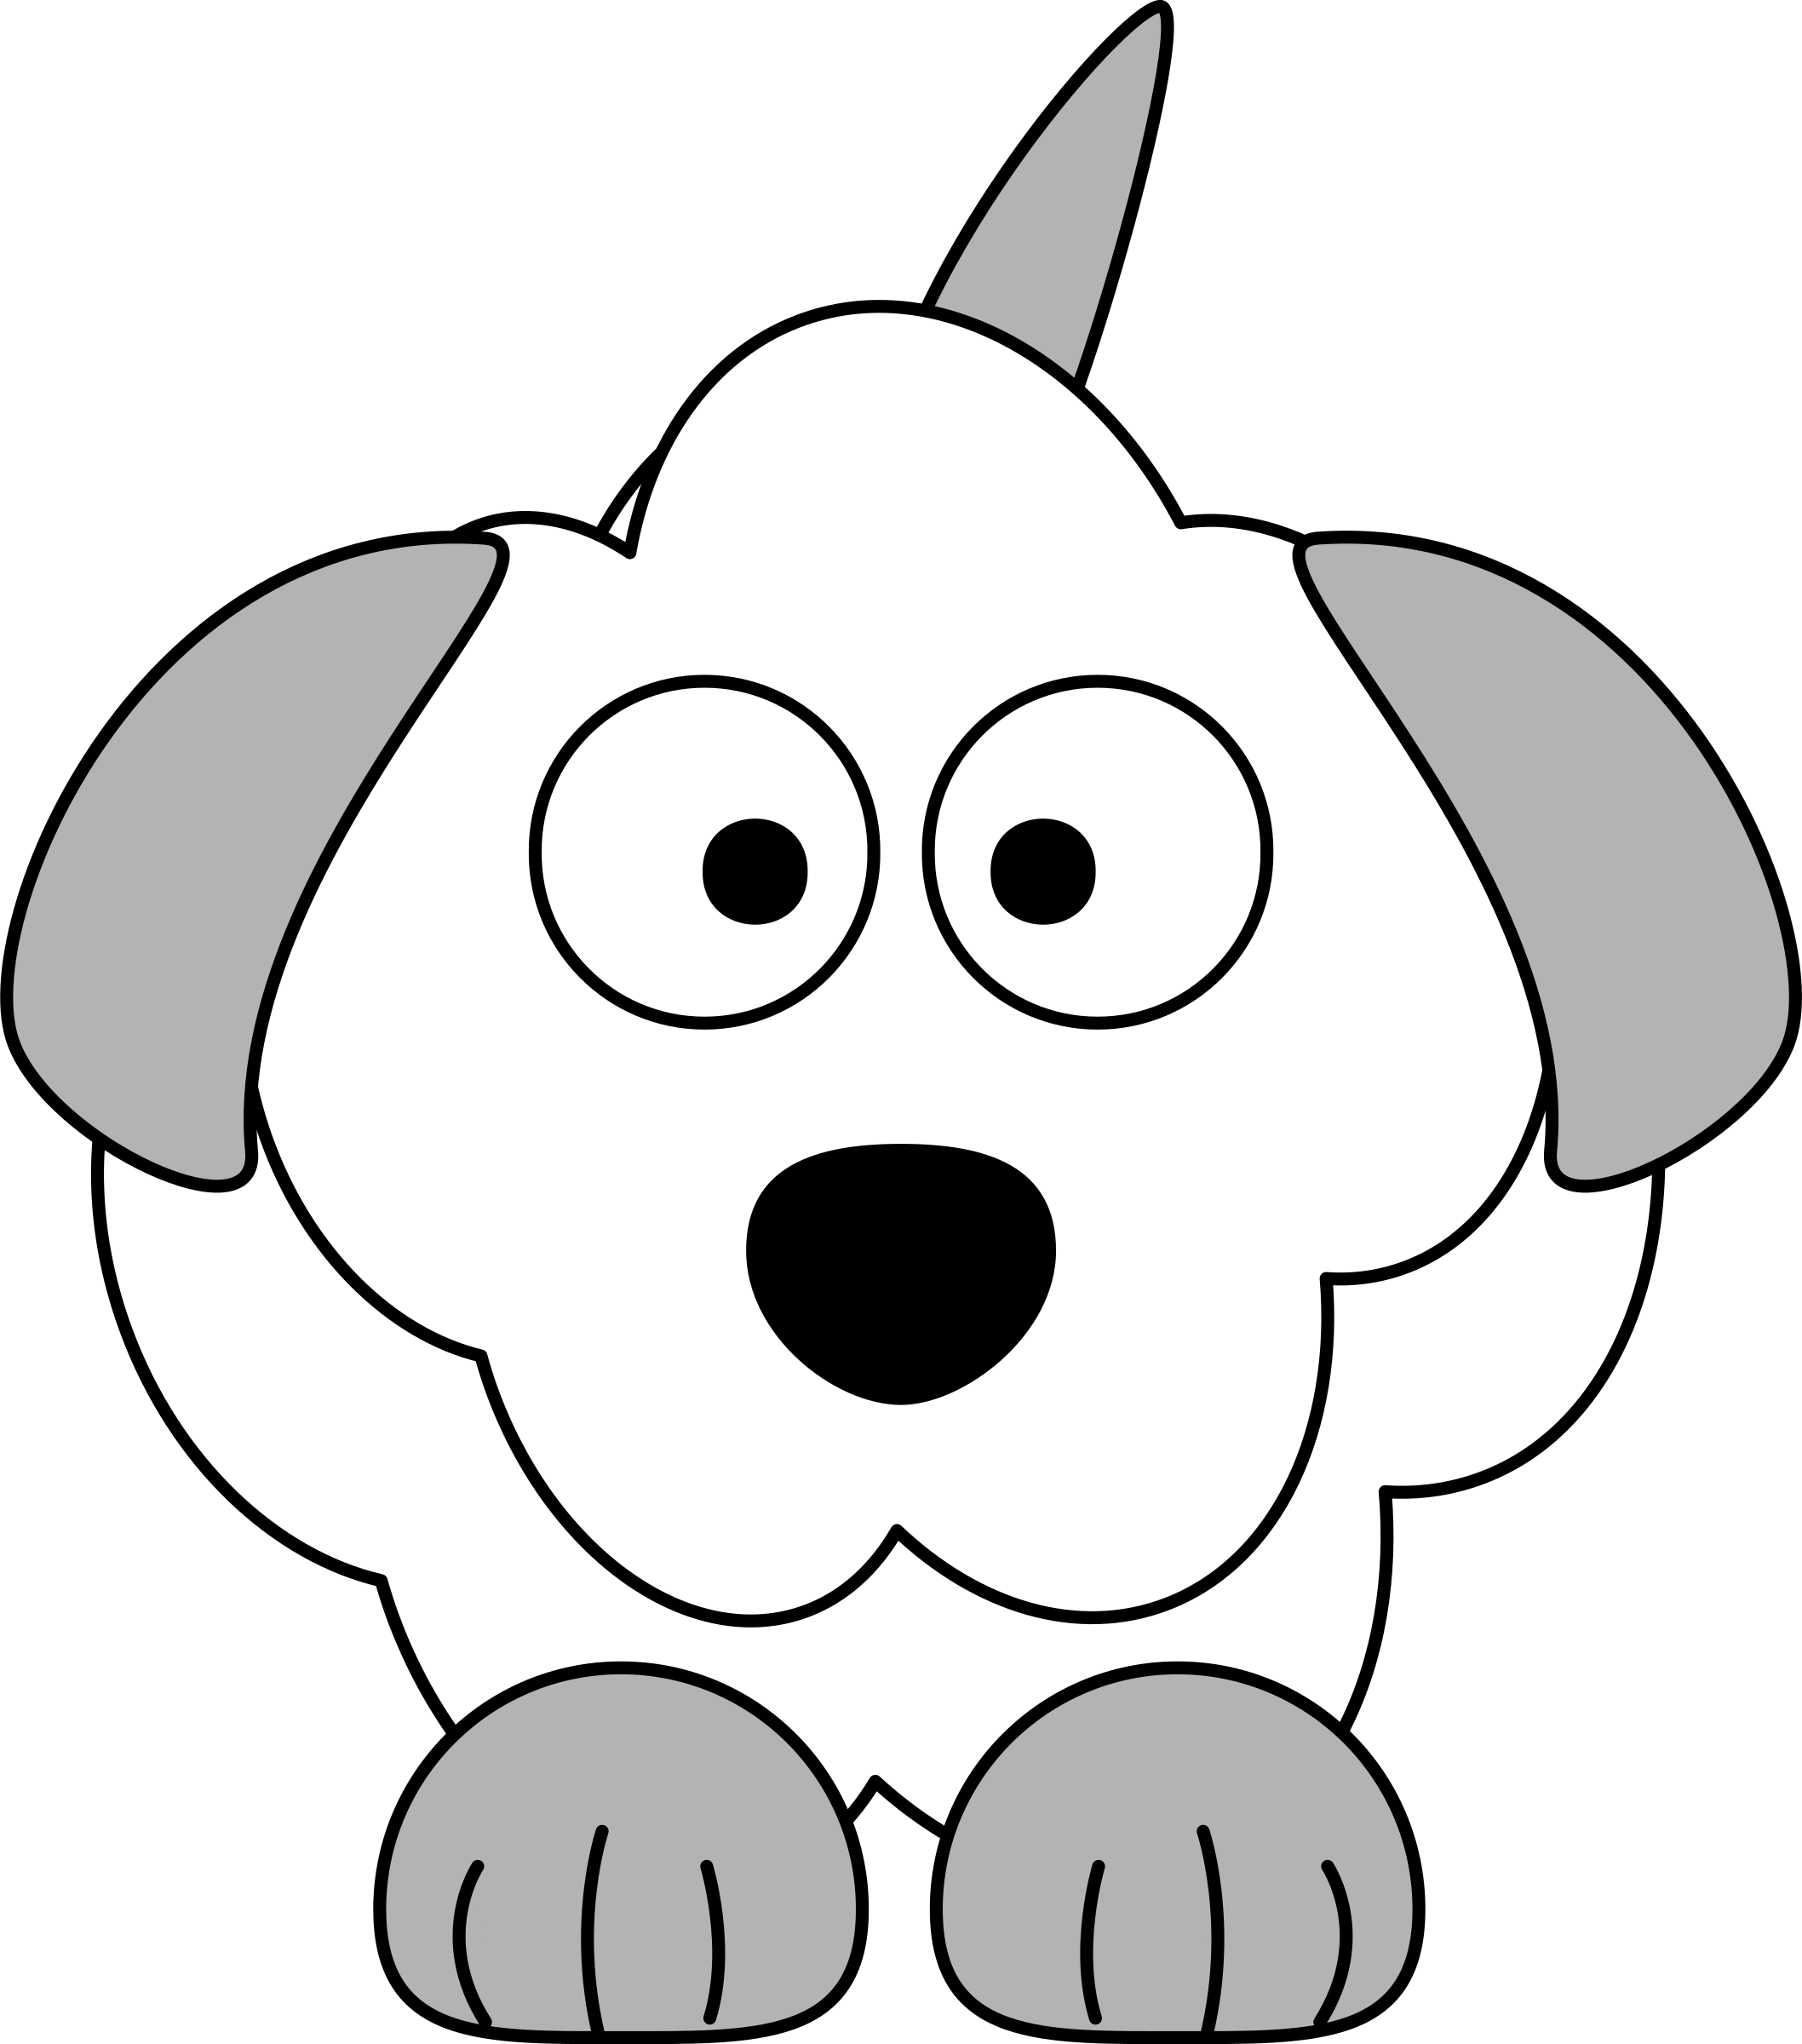 nose black and white clipart dog